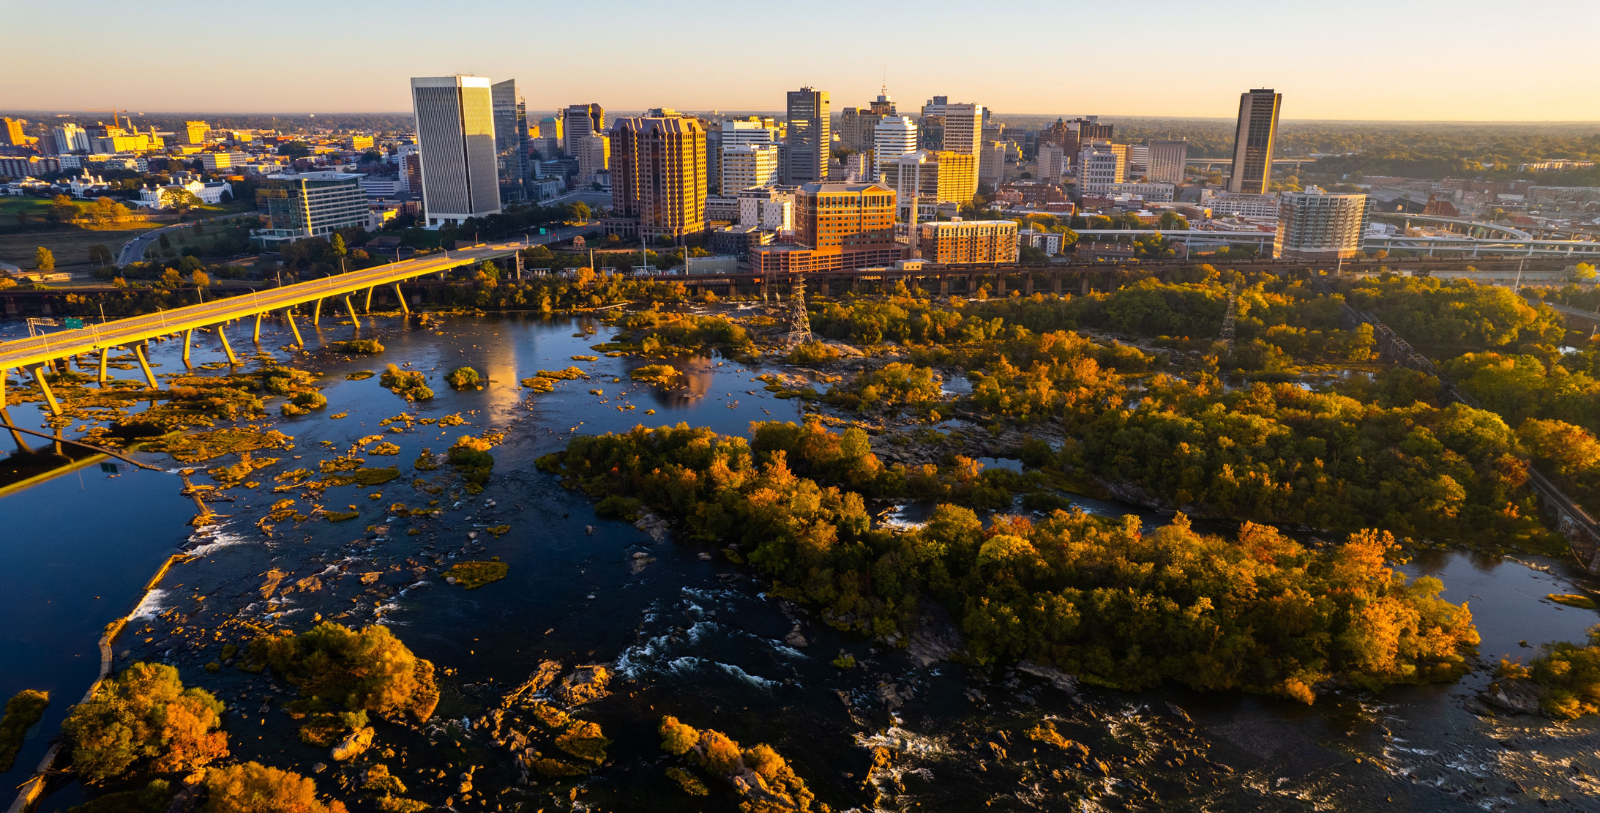 Uncover the fascinating heritage and vibrant culture of Richmond, Virginia, a city with a prominent place in American history.